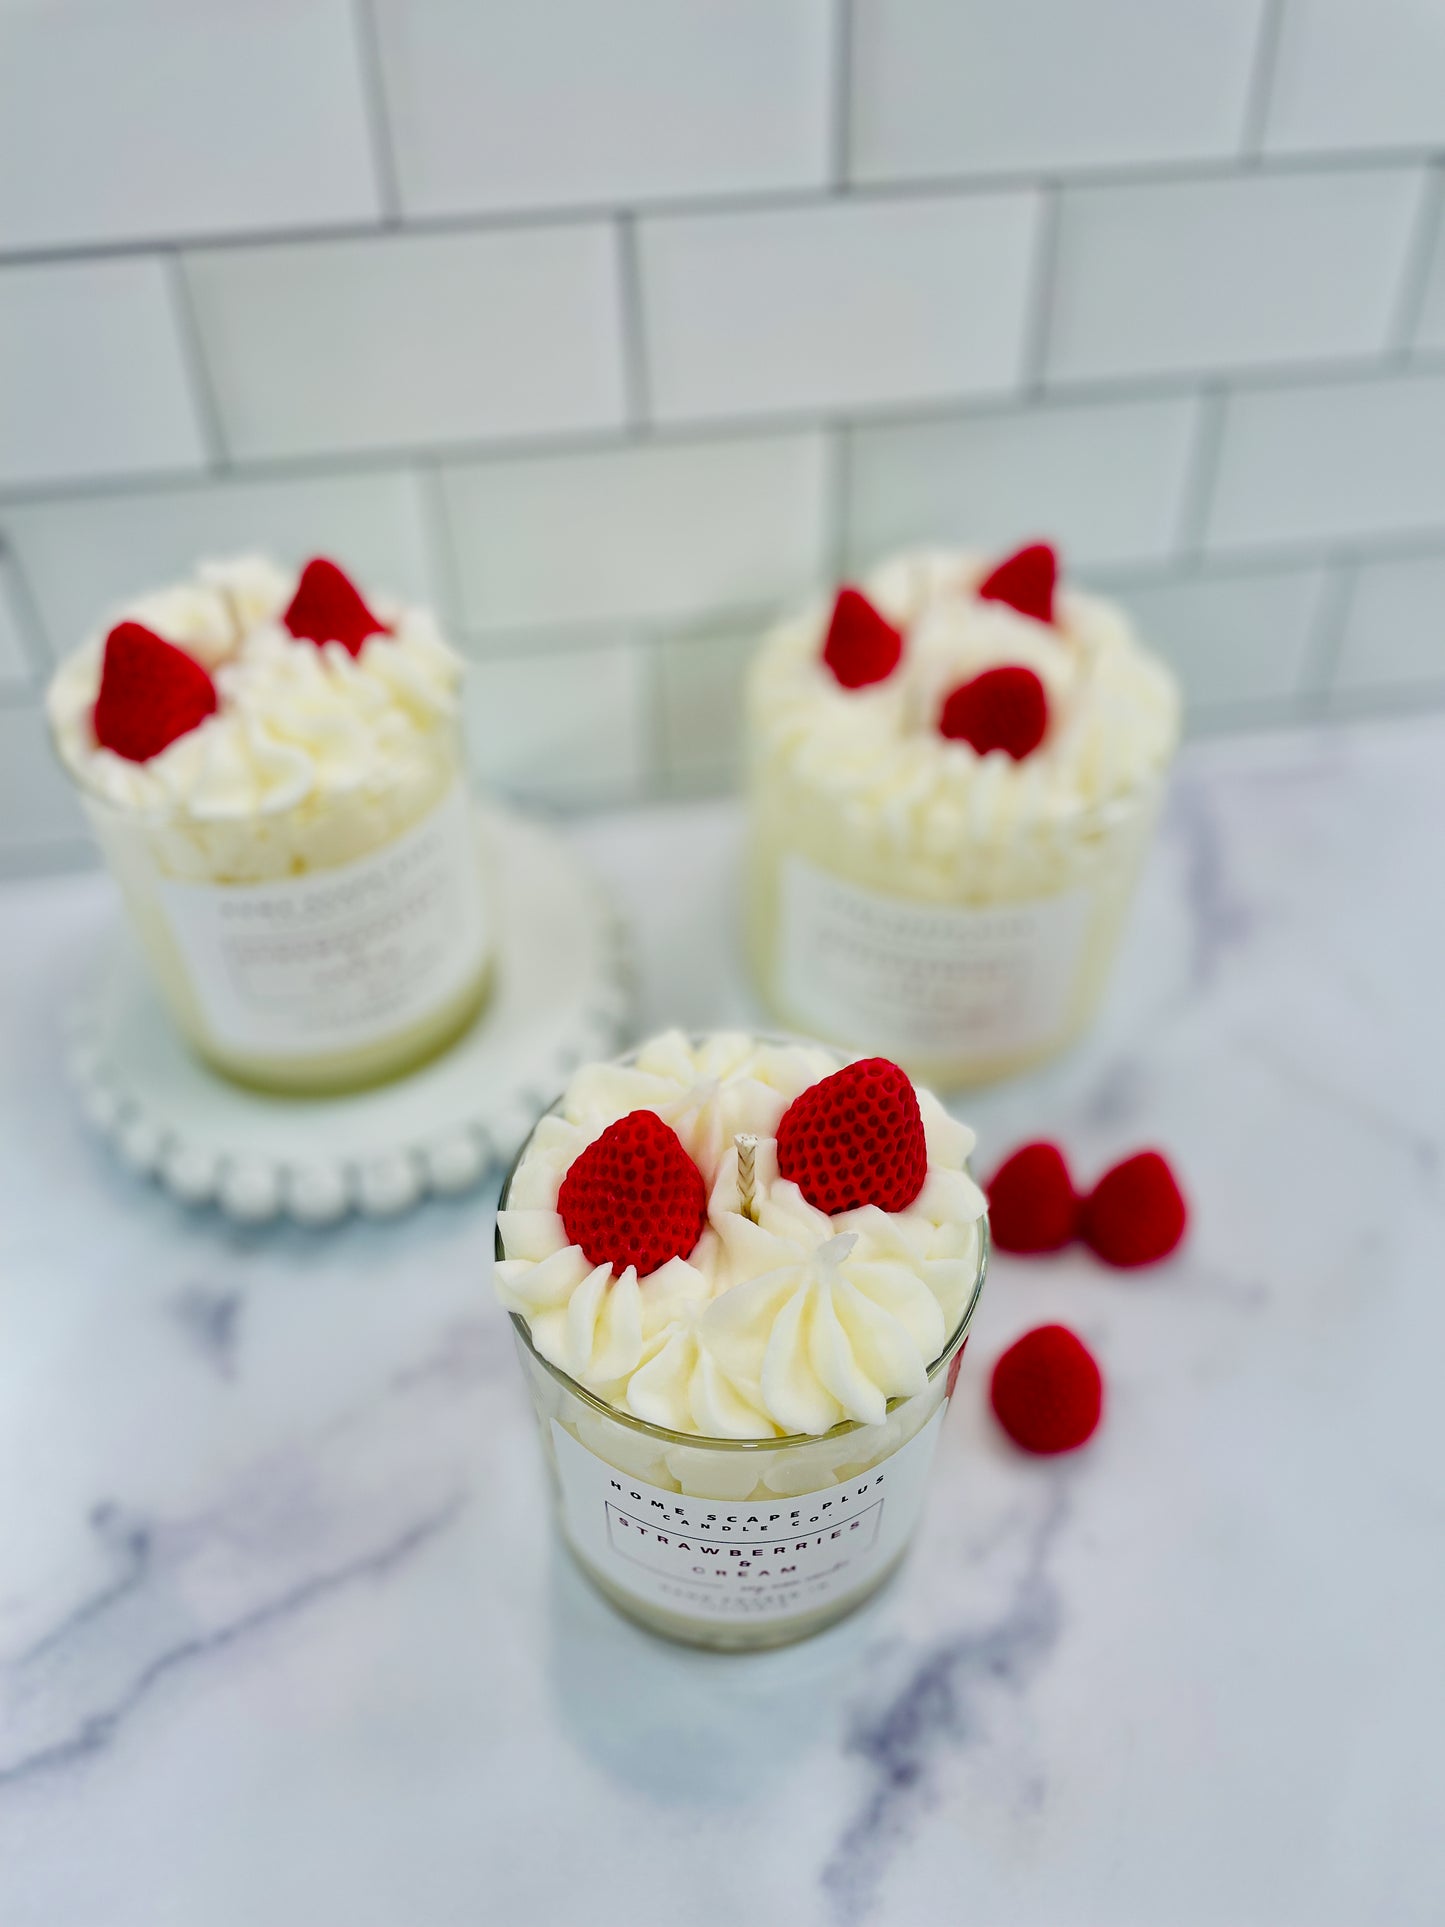 Soy Wax Candle/Strawberries & Cream